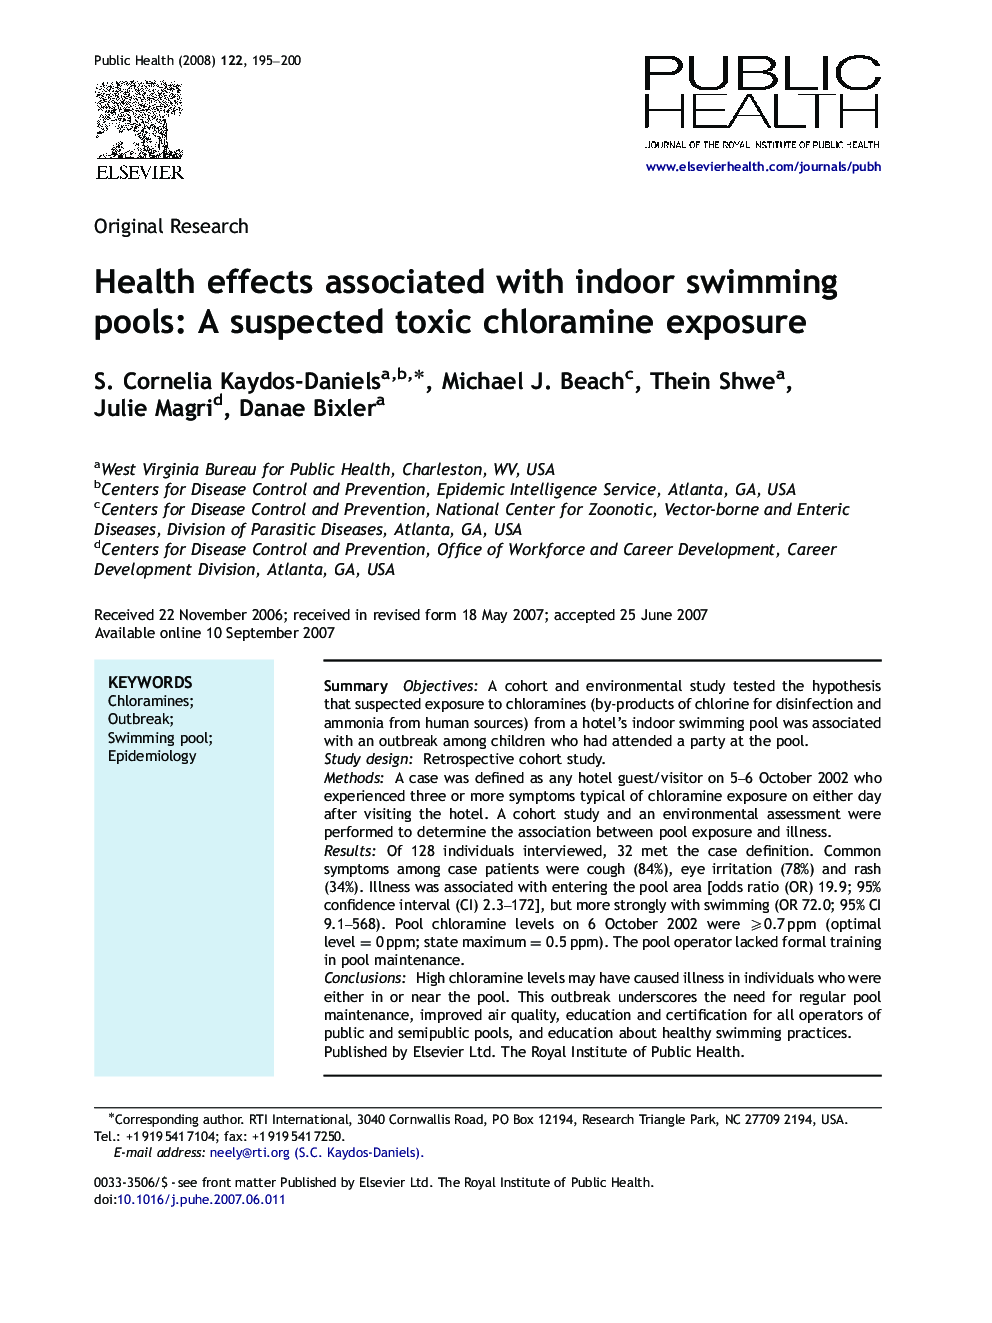 Health effects associated with indoor swimming pools: A suspected toxic chloramine exposure